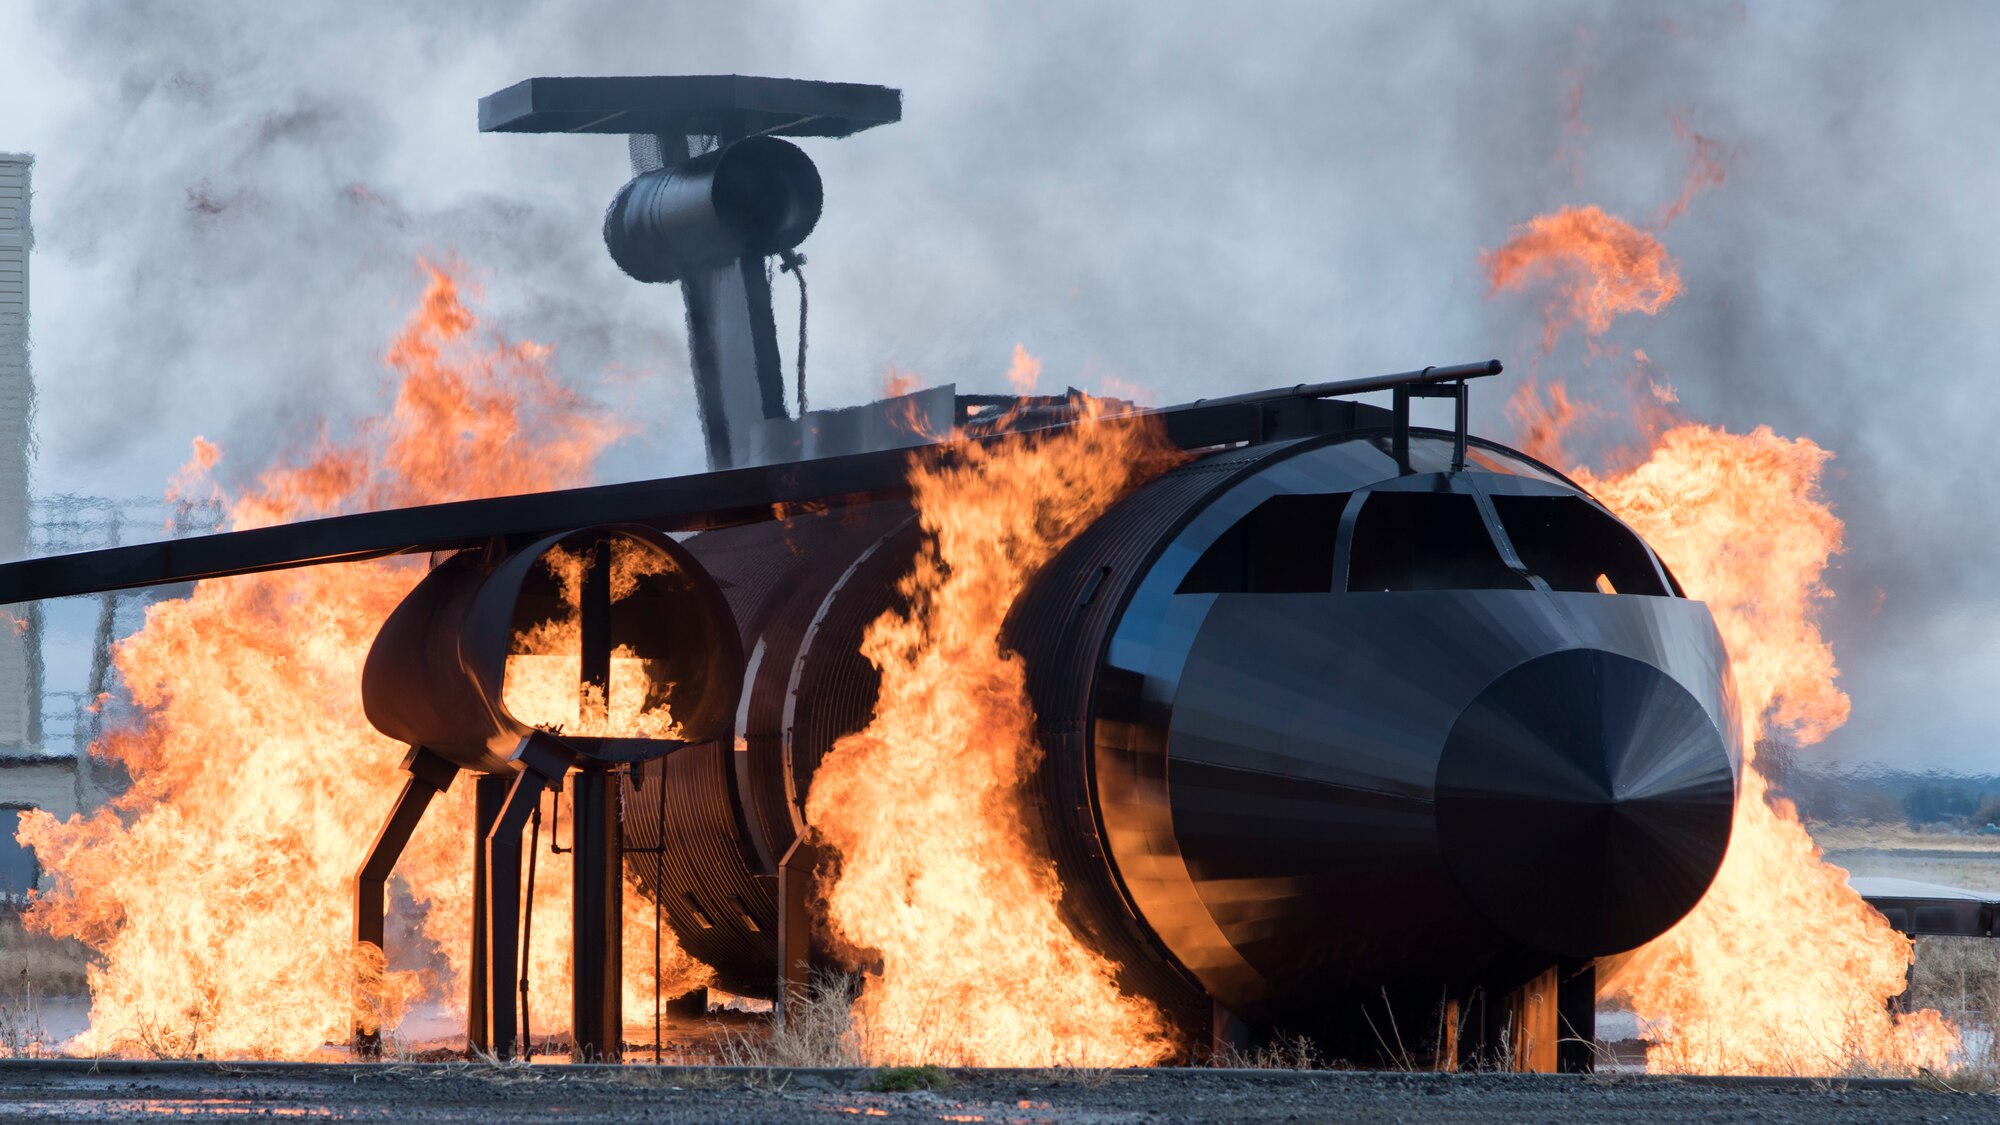 A dummy aircraft burns in the 92nd Civil Engineering Squadron Fire Department training area during a demonstration for members of the Spokane Local Emergency Planning Committee at Fairchild Air Force Base, Washington, Nov. 7, 2018. Team Fairchild firefighters use a dummy and simulate flames with safe propane gas to minimize environmental impact while maintaining readiness training efforts. (U.S. Air Force Photo/ Senior Airman Ryan Lackey)